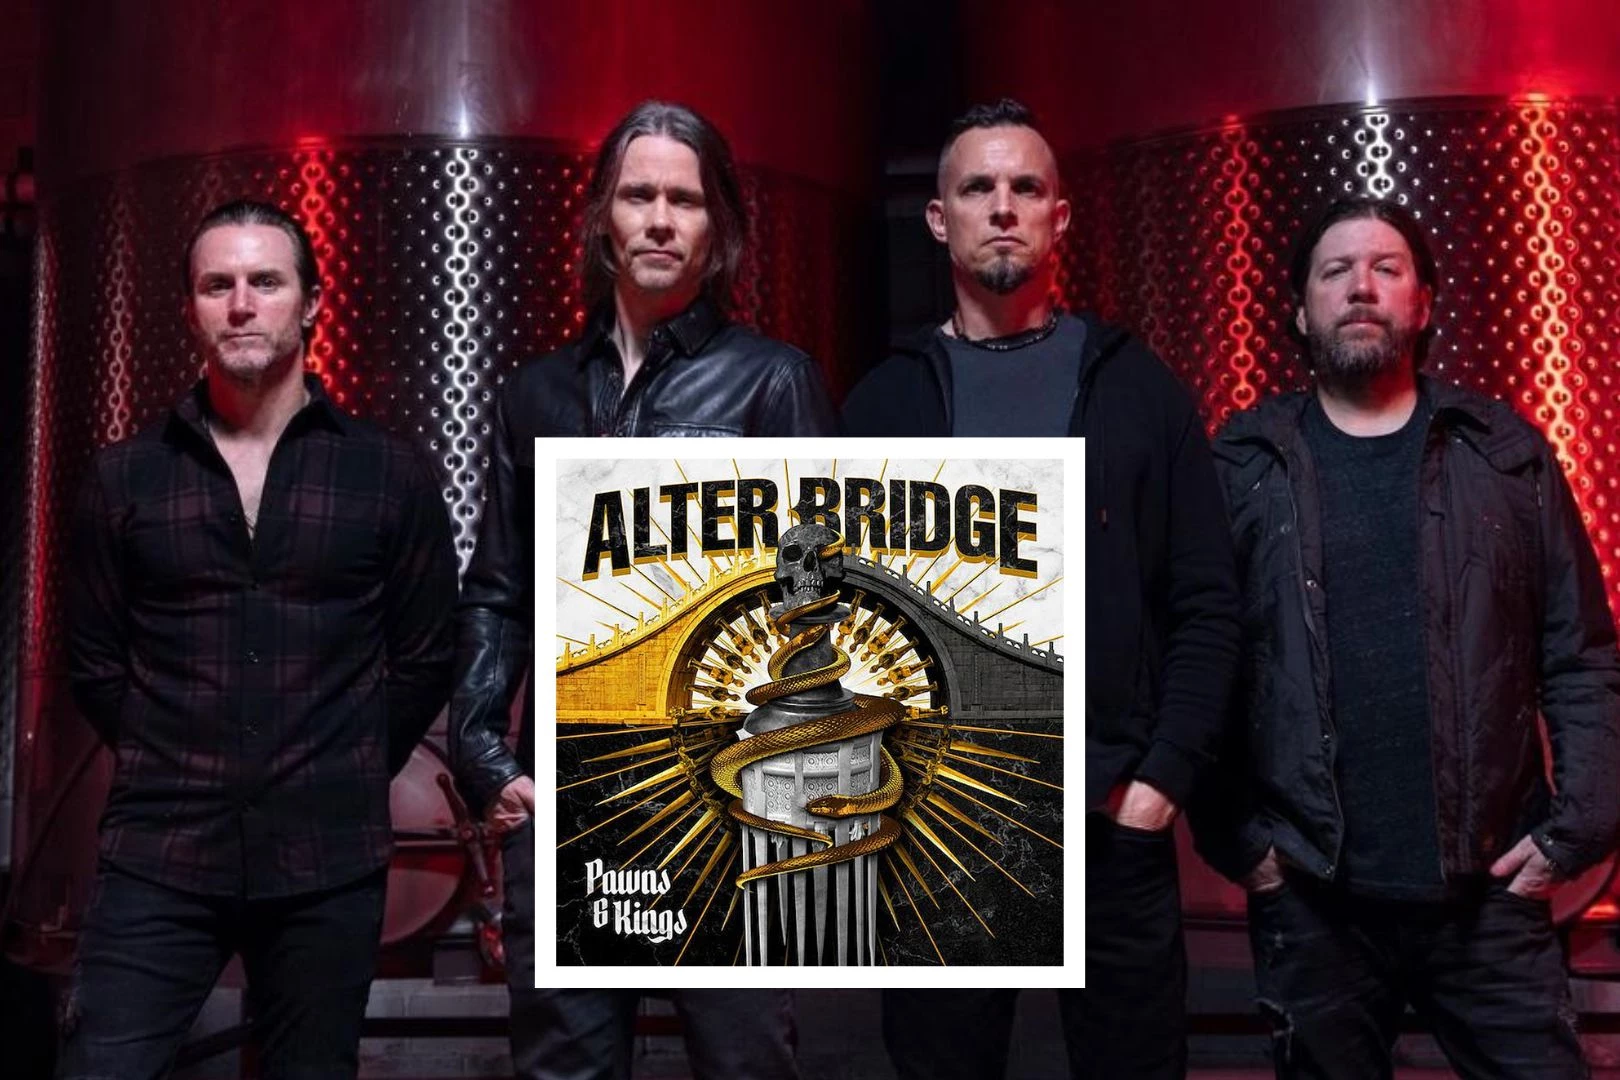 Alter Bridge / Pawns And Kings a staggering new opus in an already  glittering career